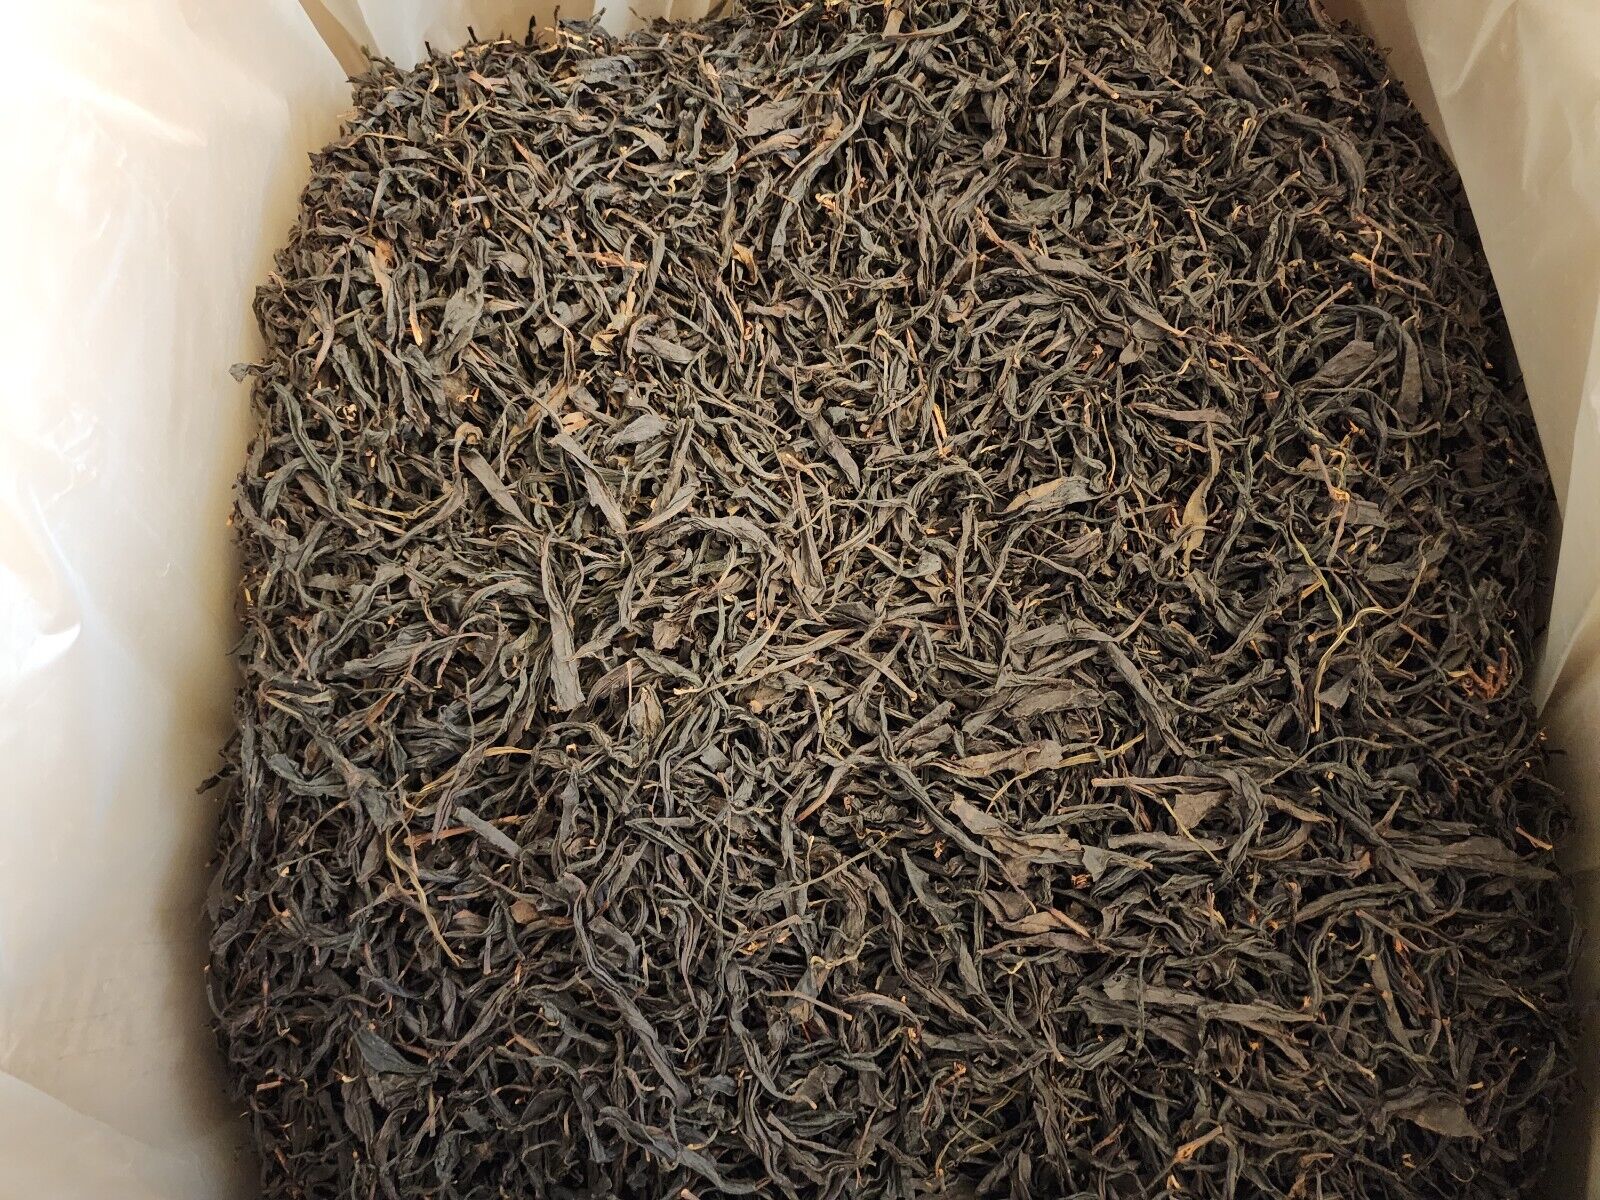 TRY SAMPLE: 100% Loose Leaf Imported Black Tea Direct from Grower